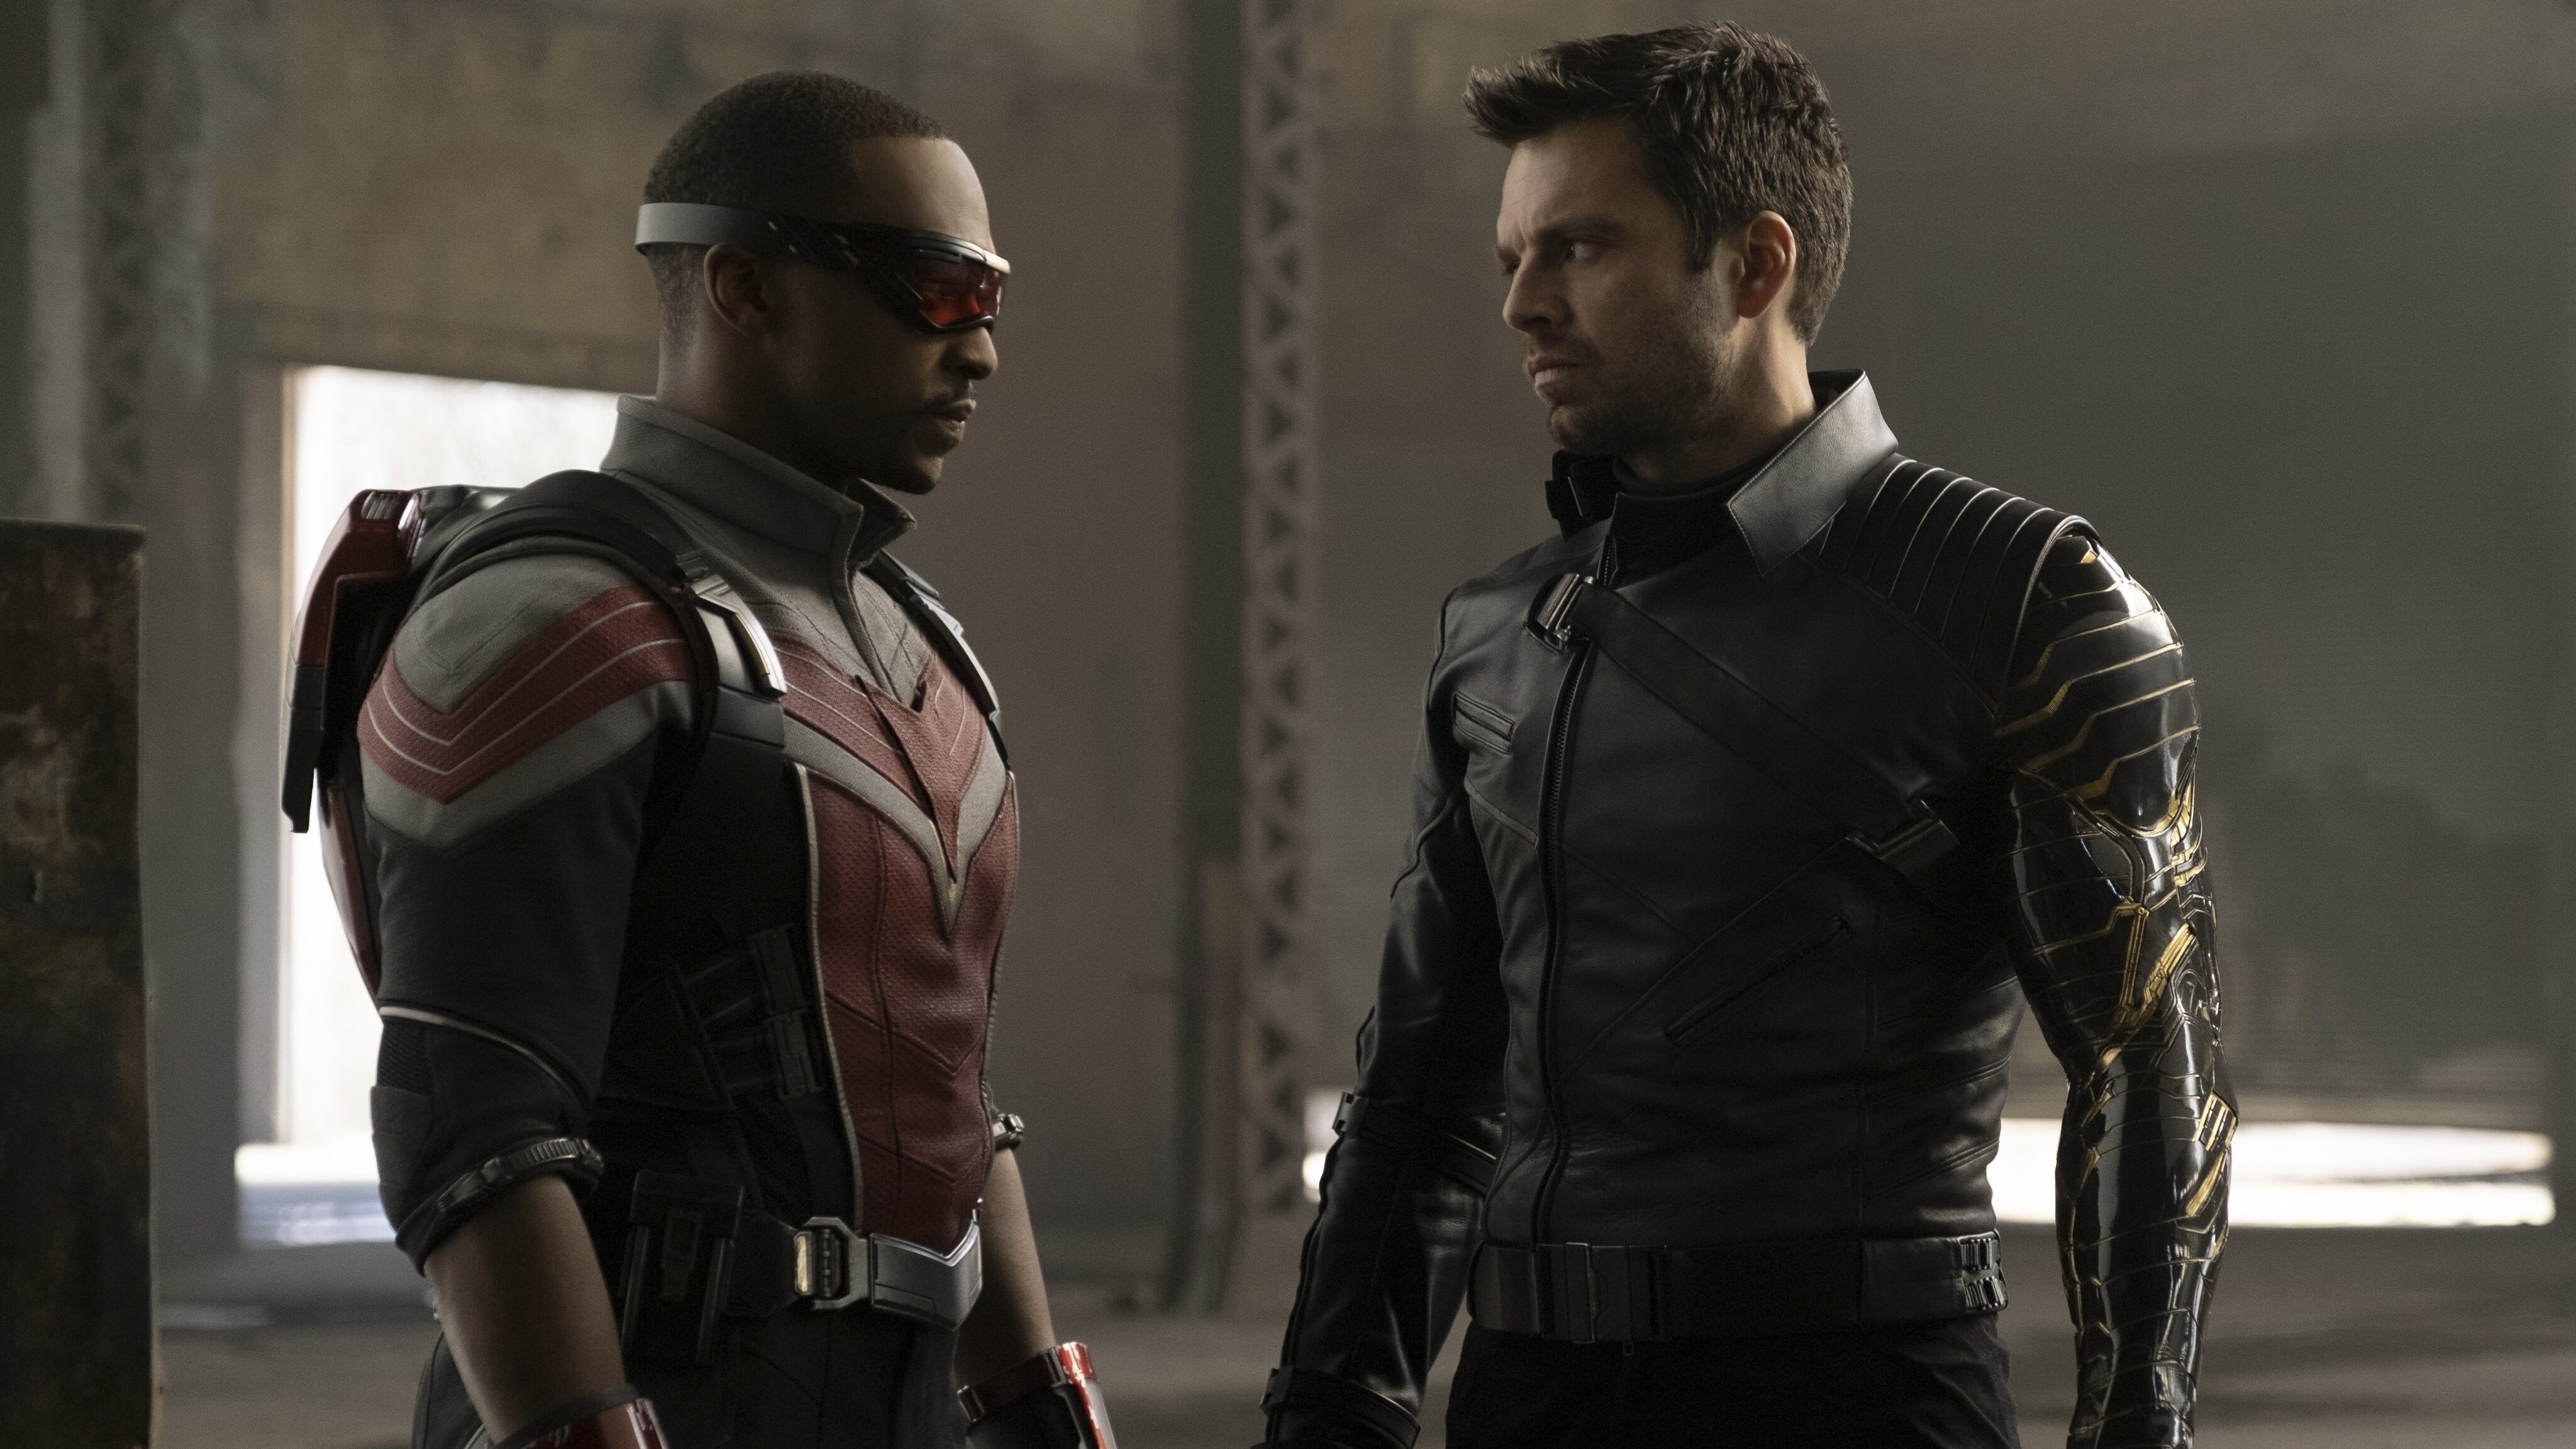 The Falcon and the Winter Soldier staring at each other.